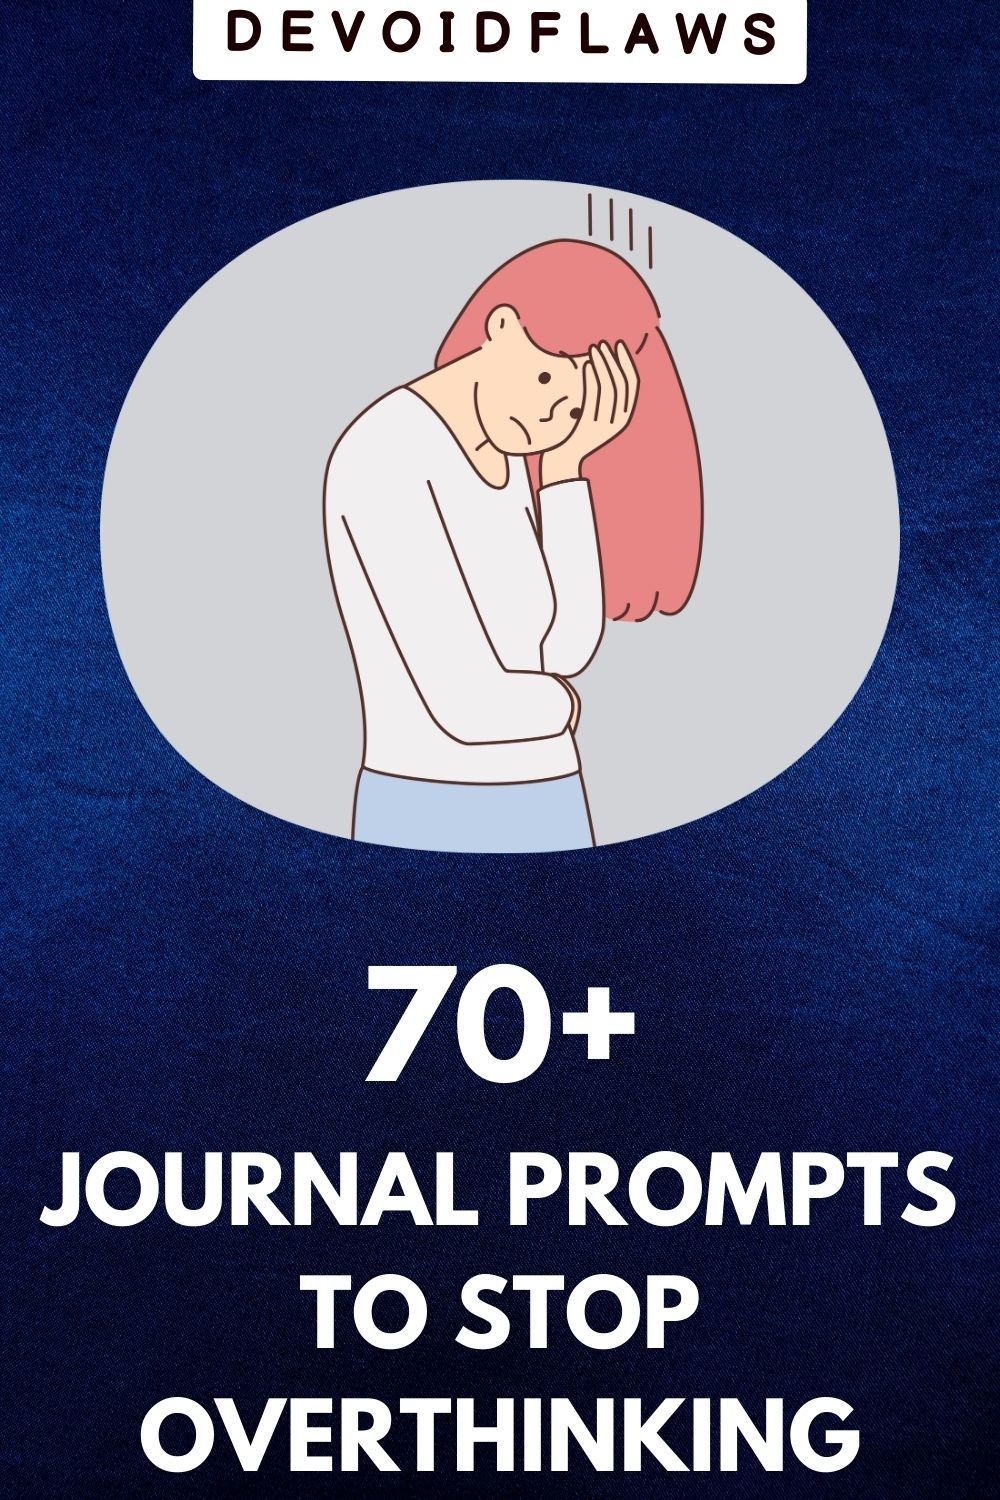 image with text - 70 journal prompts to stop overthinking